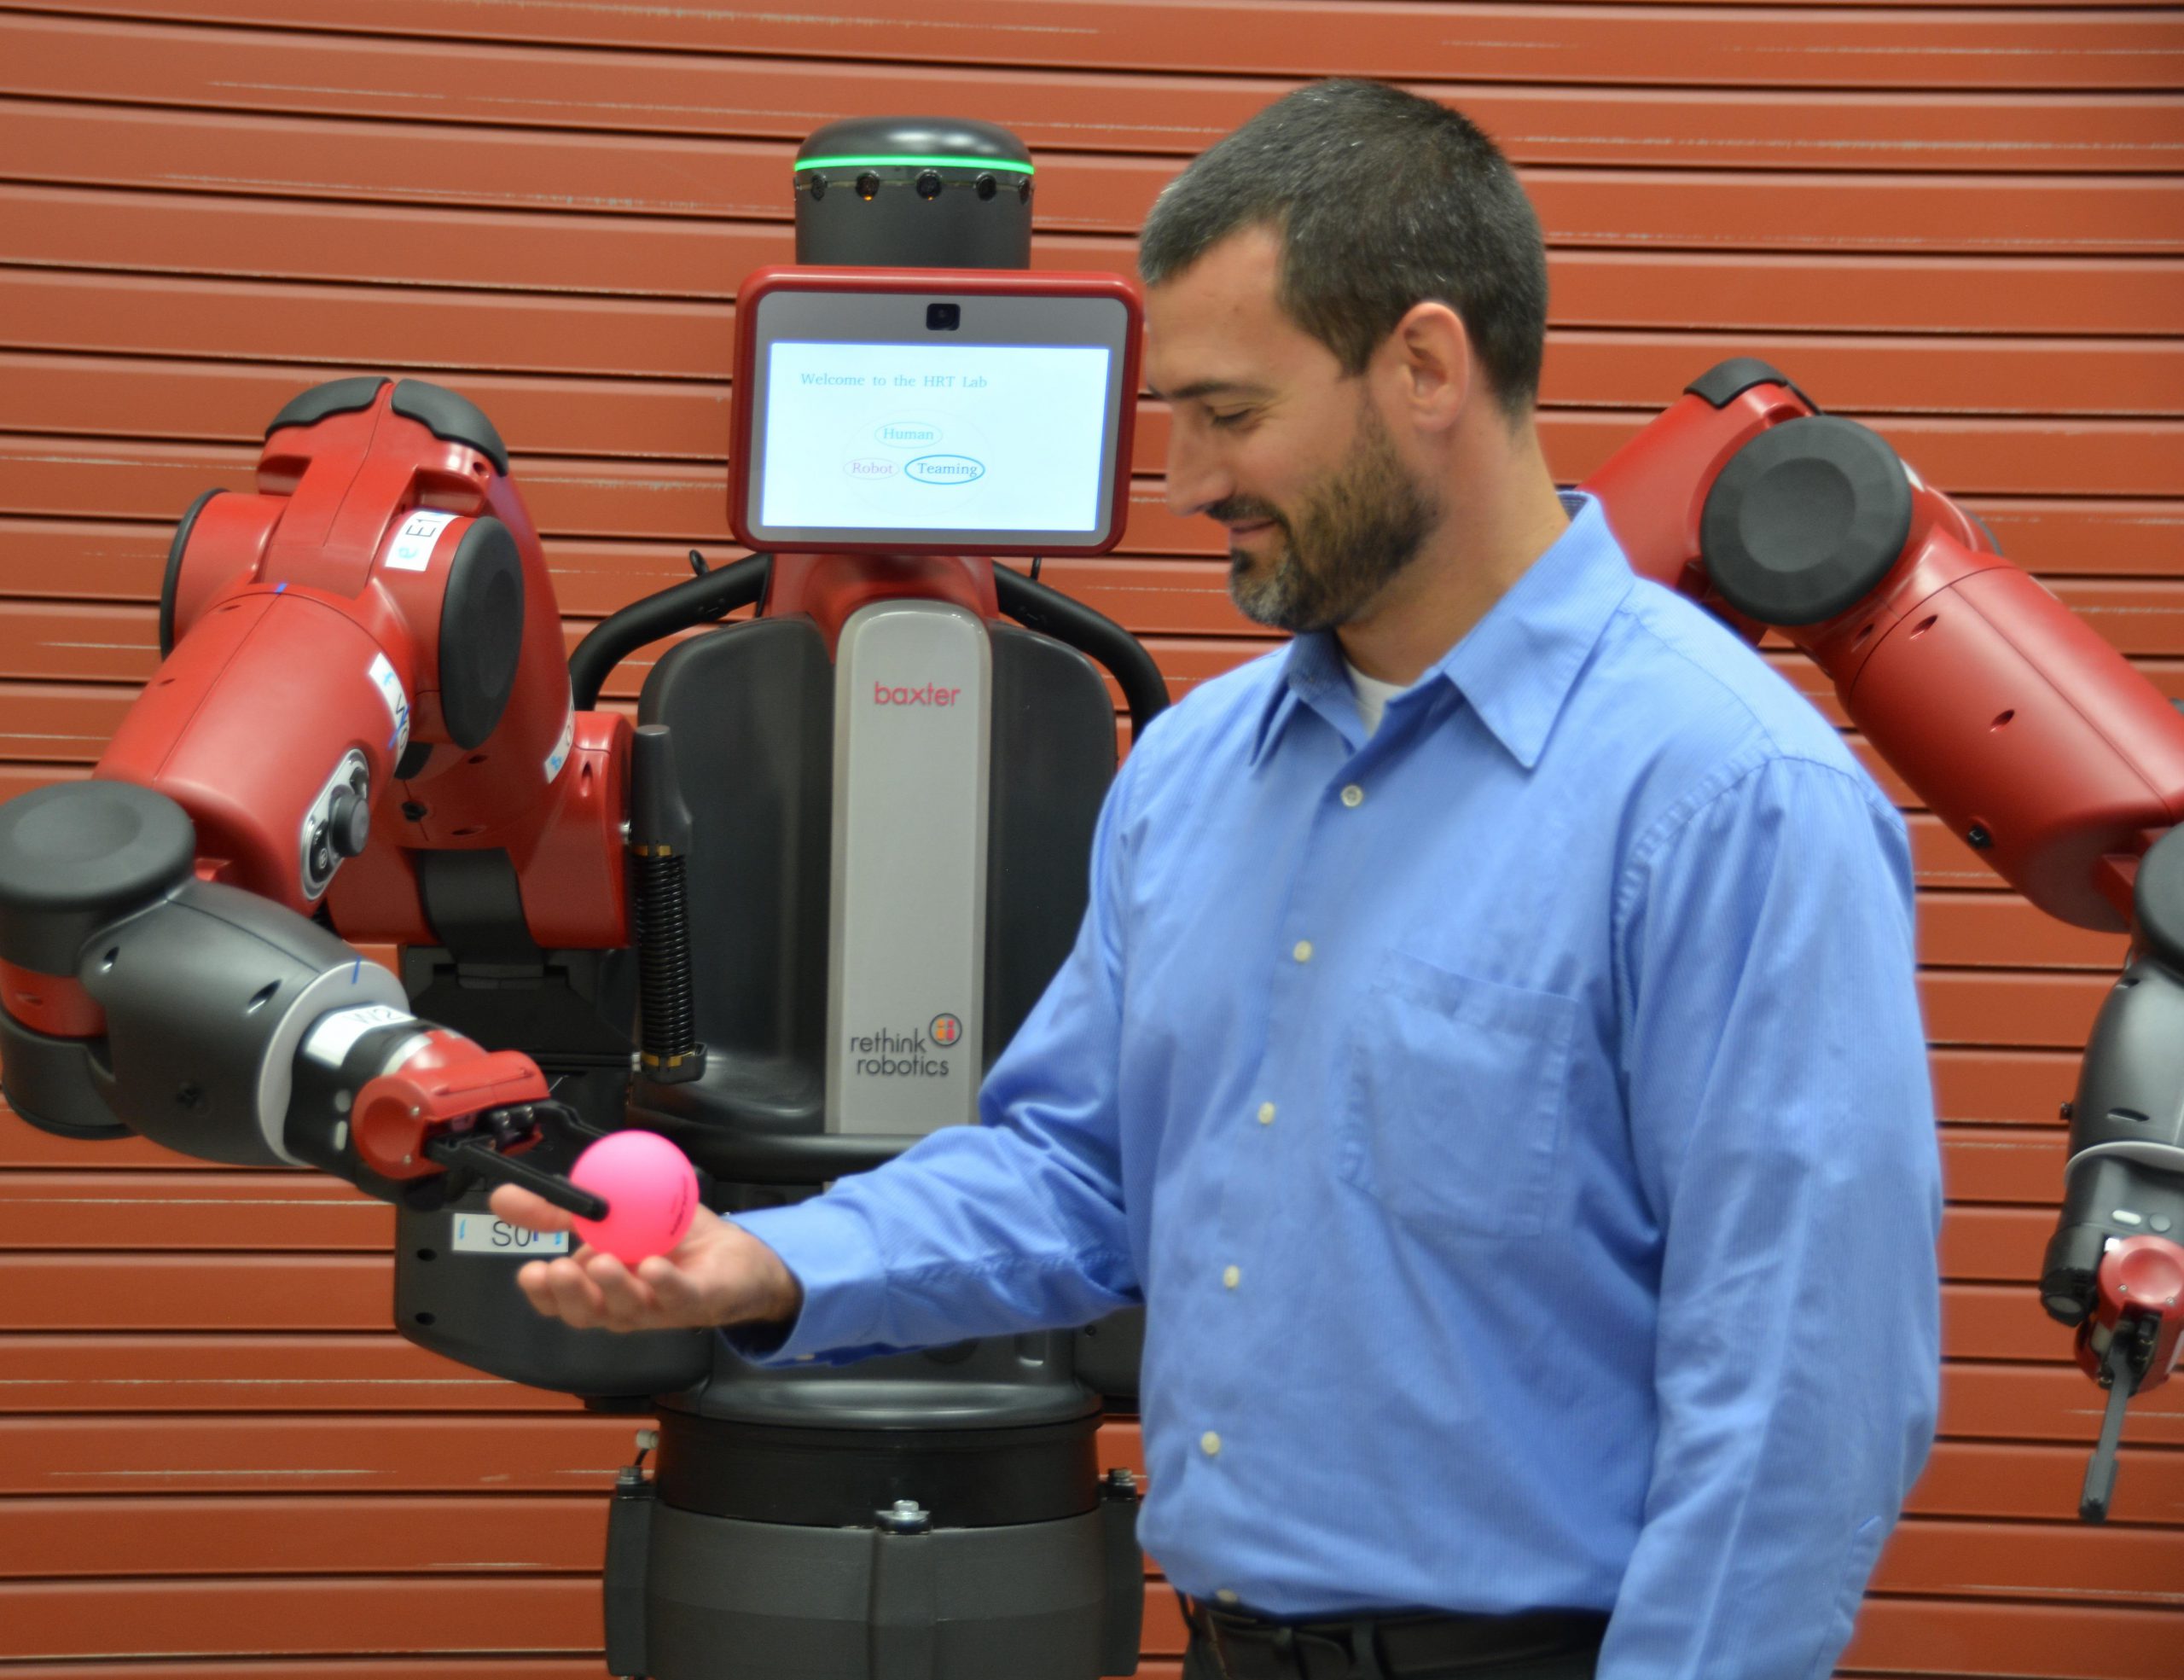 Dr. Joseph Lyons, Human Trust and Interaction Branch technical advisor, is given a ball by the Baxter robot after instructions were given to the robot by a member of Lyons' team.